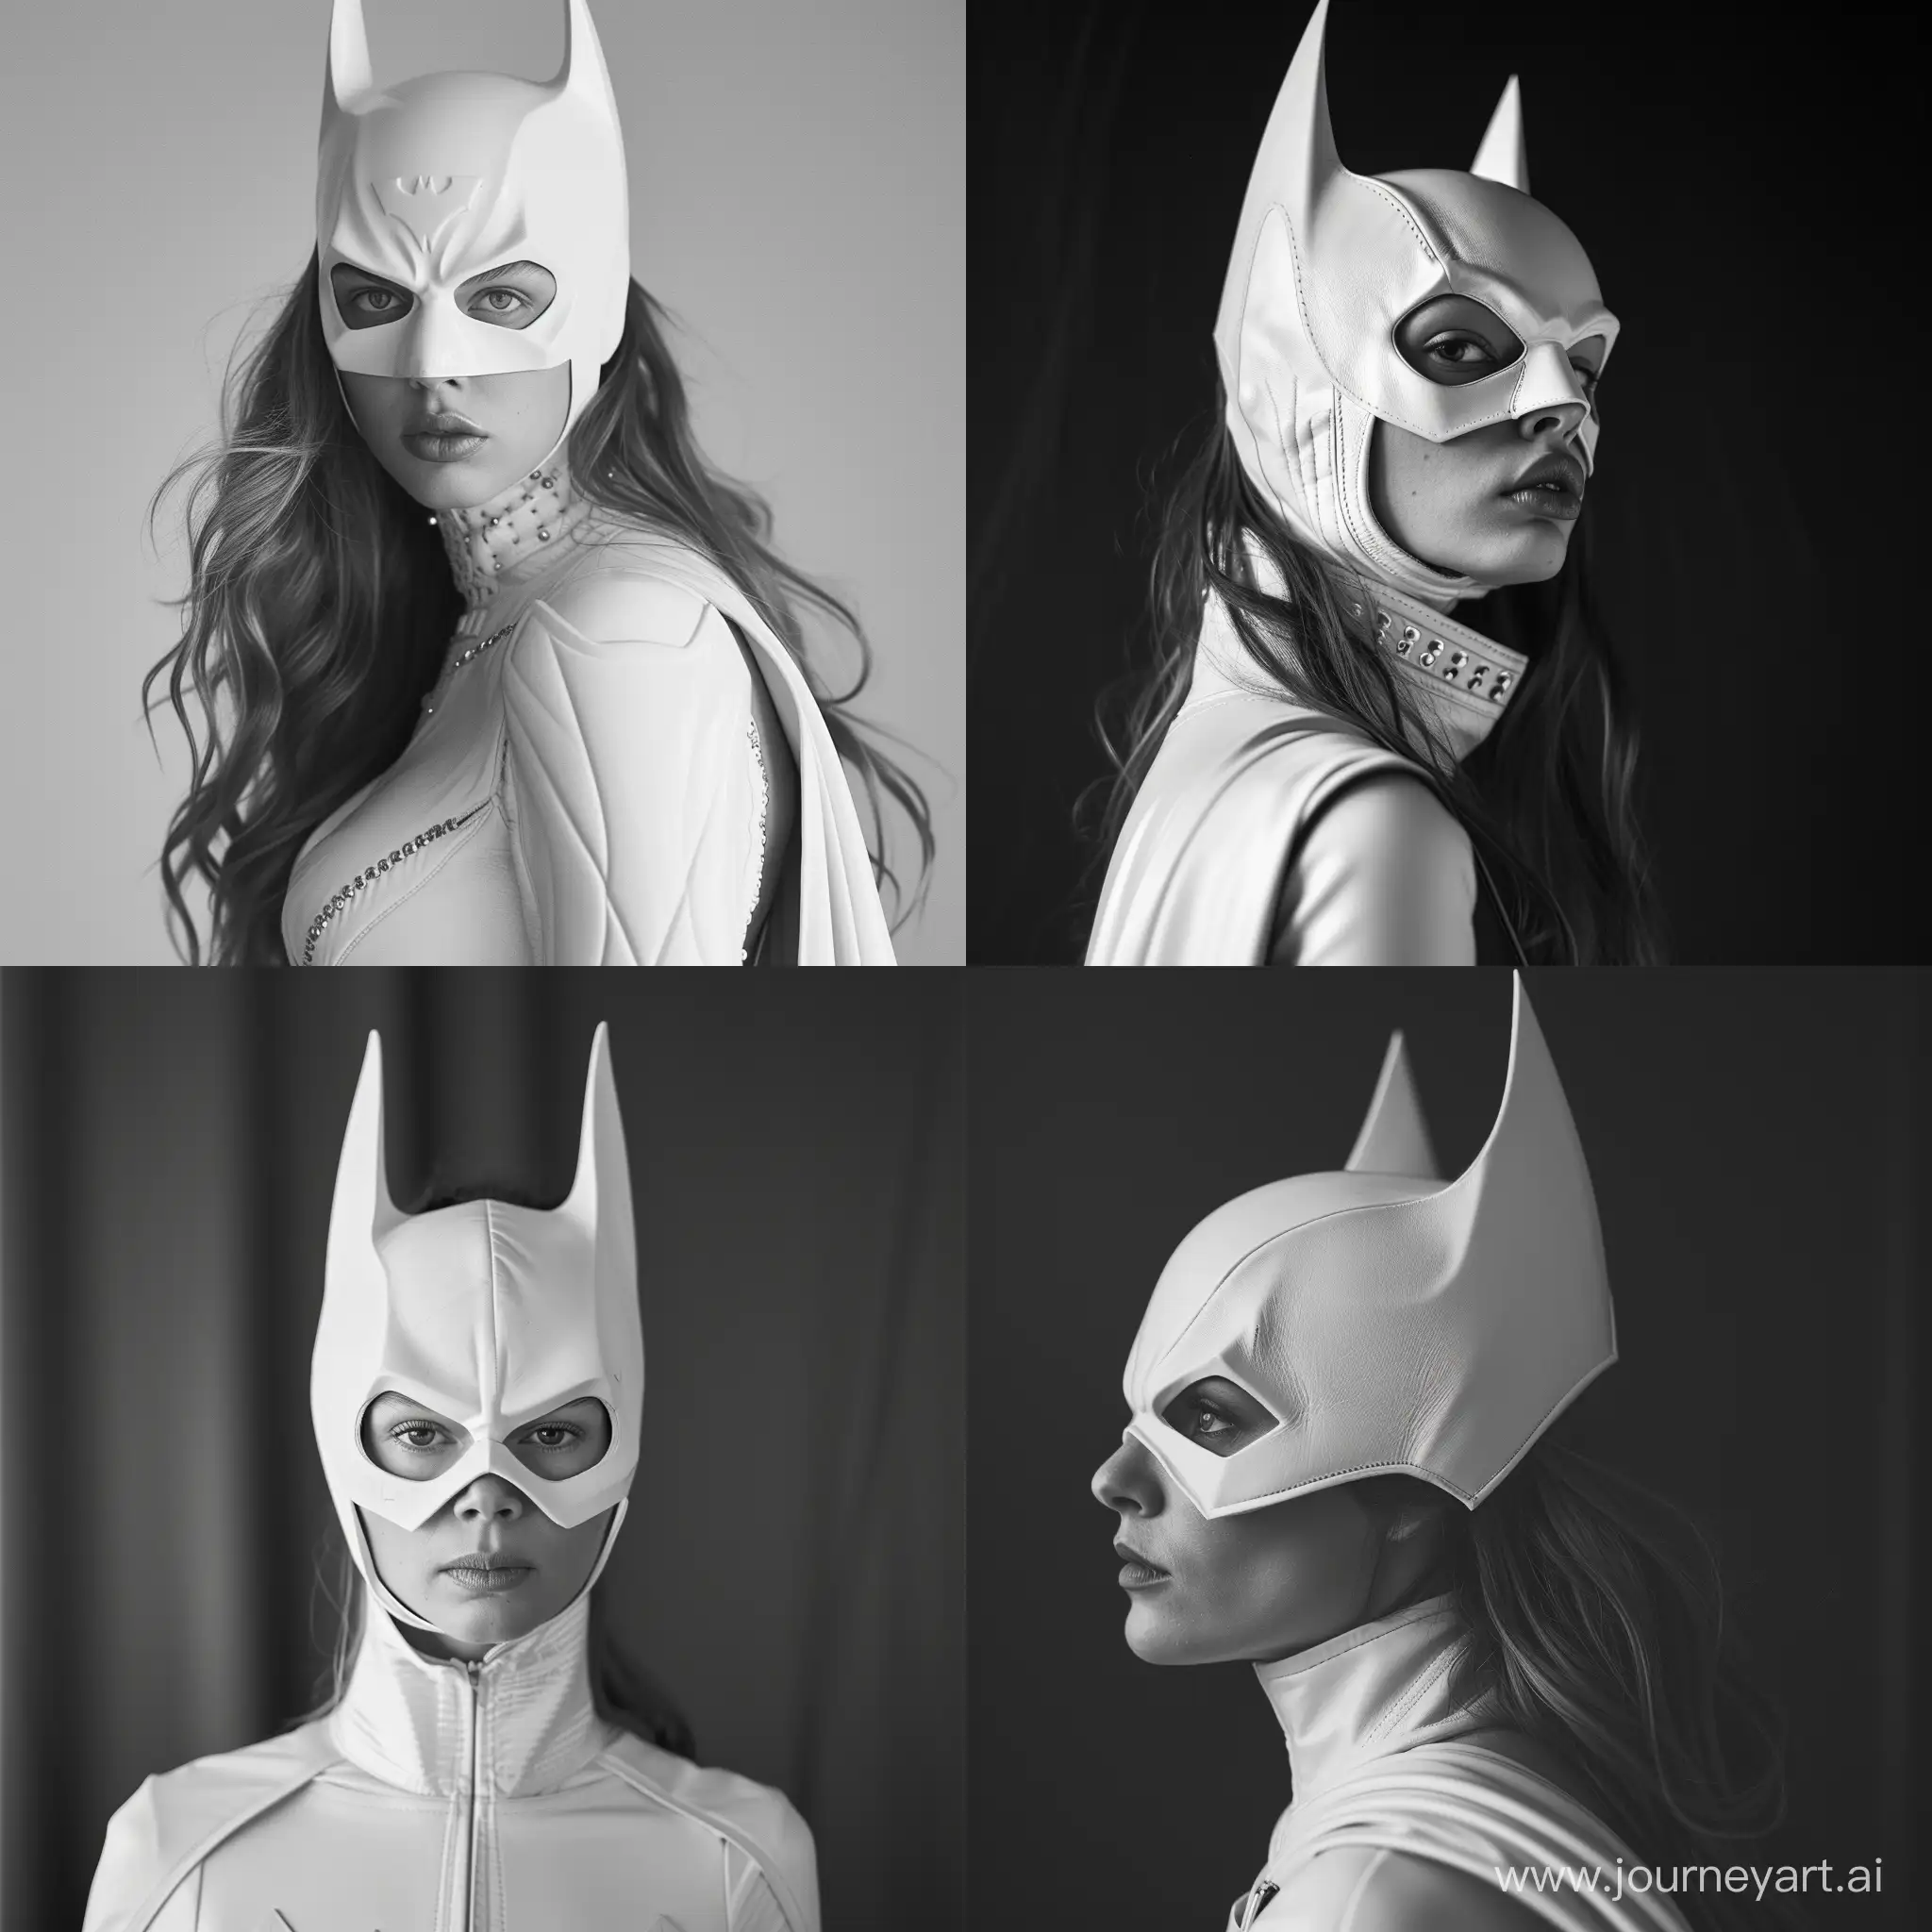 Batgirl in white Sony α7 III camera, equipped with an 85mm lens at F 1.2 aperture